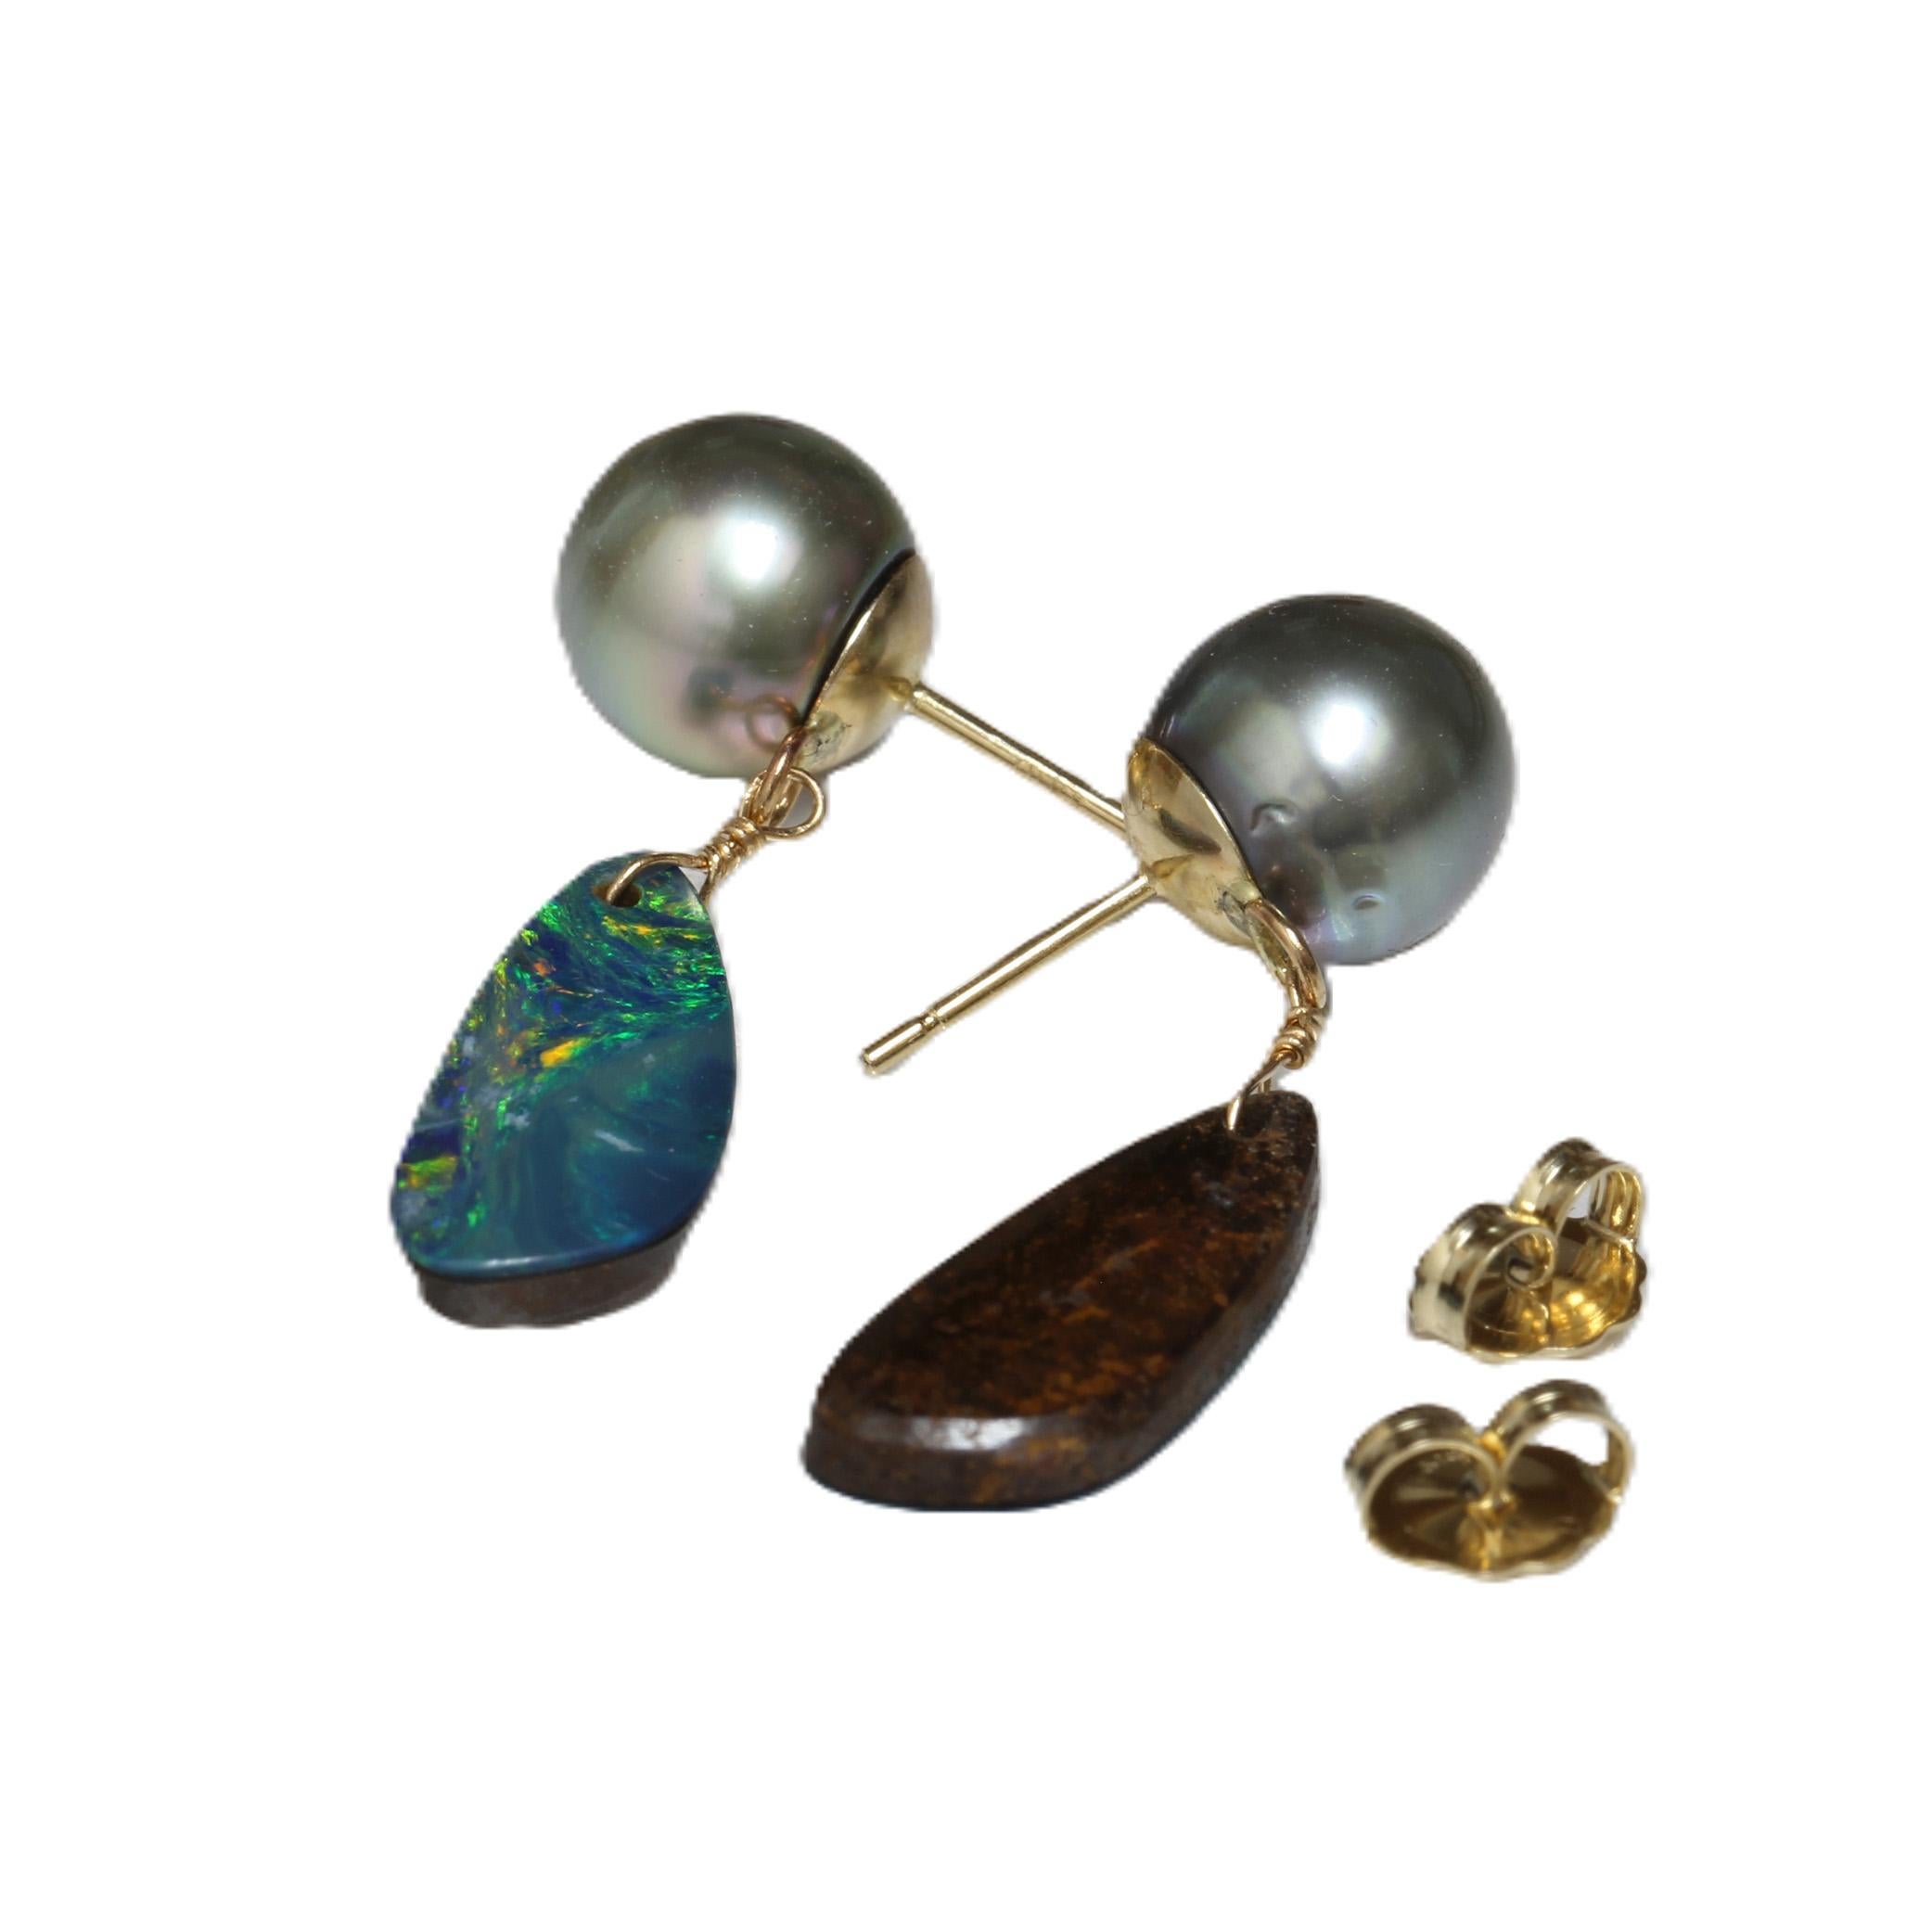 Origin: French Polynesia
Pearl Type: Tahitian Pearls
Pearl Size: 9.0 - 9.5 mm
Pearl Color: Natural Turquoise Green
Pearl Shape: Round
Pearl Surface: AAA
Pearl Luster: AAA Gem
Pearl Nacre: Top
Opal: Oval Shape
Length:	About 30 mm
Gold:	14kt